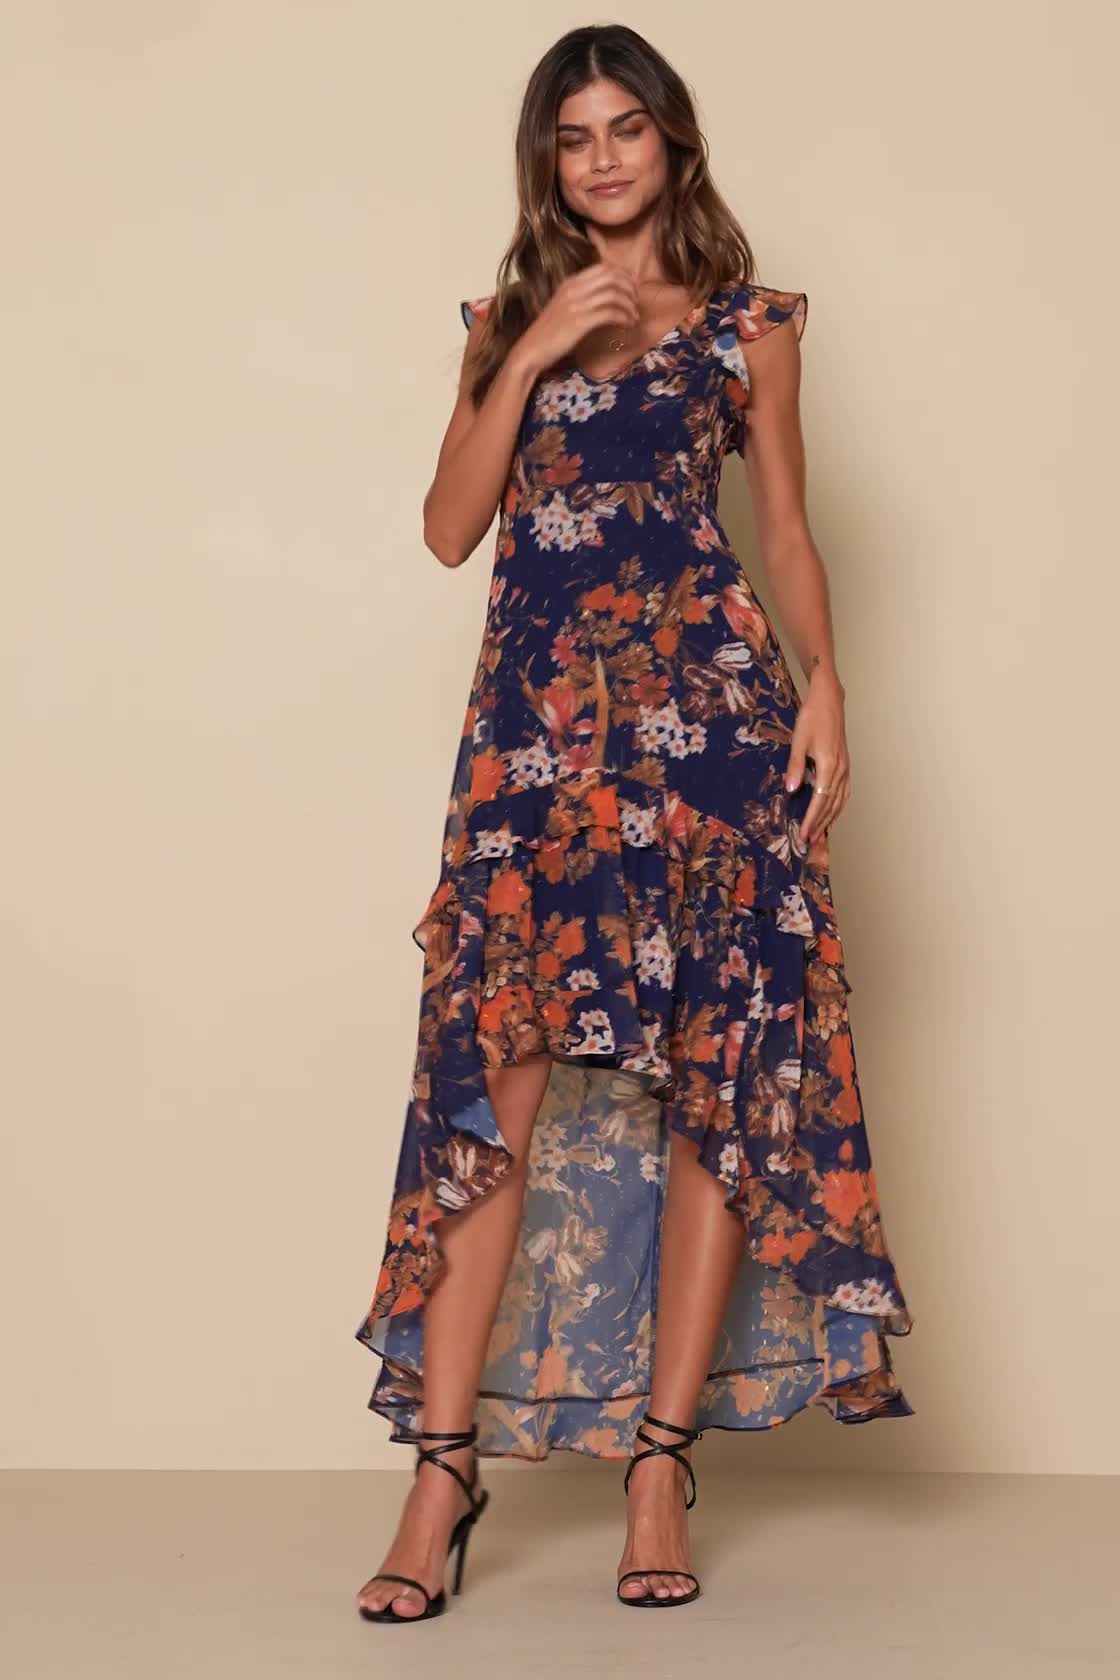 Cute High-Low Dresses: Casual or Formal, Always Trendy  Find a Pretty High-Low  Maxi Dress at a Great Price - Lulus